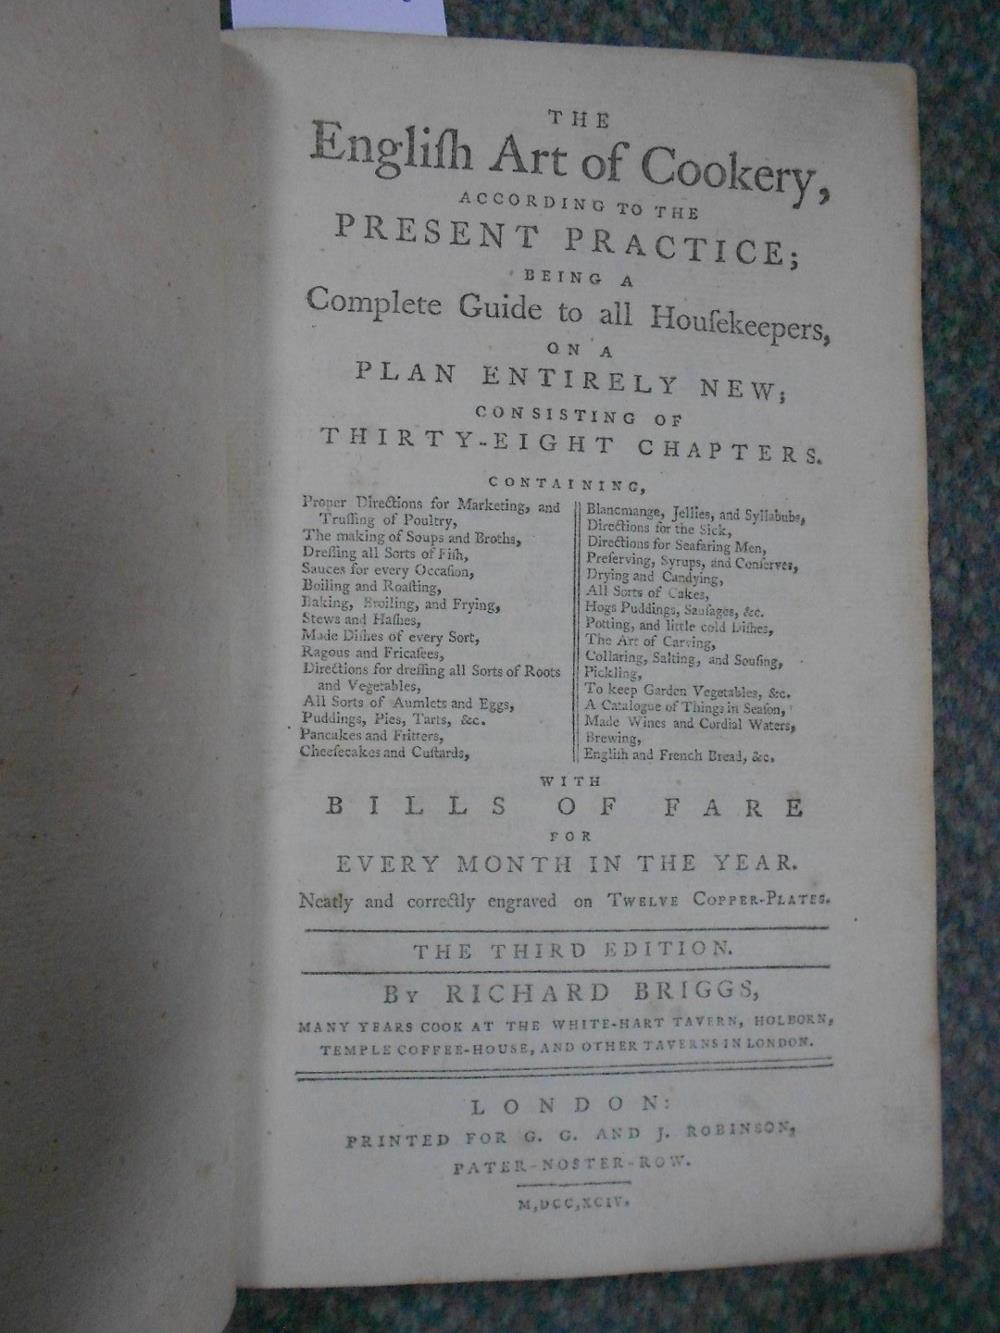 BRIGGS (Richard) The English Art of Cookery.., London 1794, thick 8vo, 3rd edition, 12 plates, - Image 2 of 4